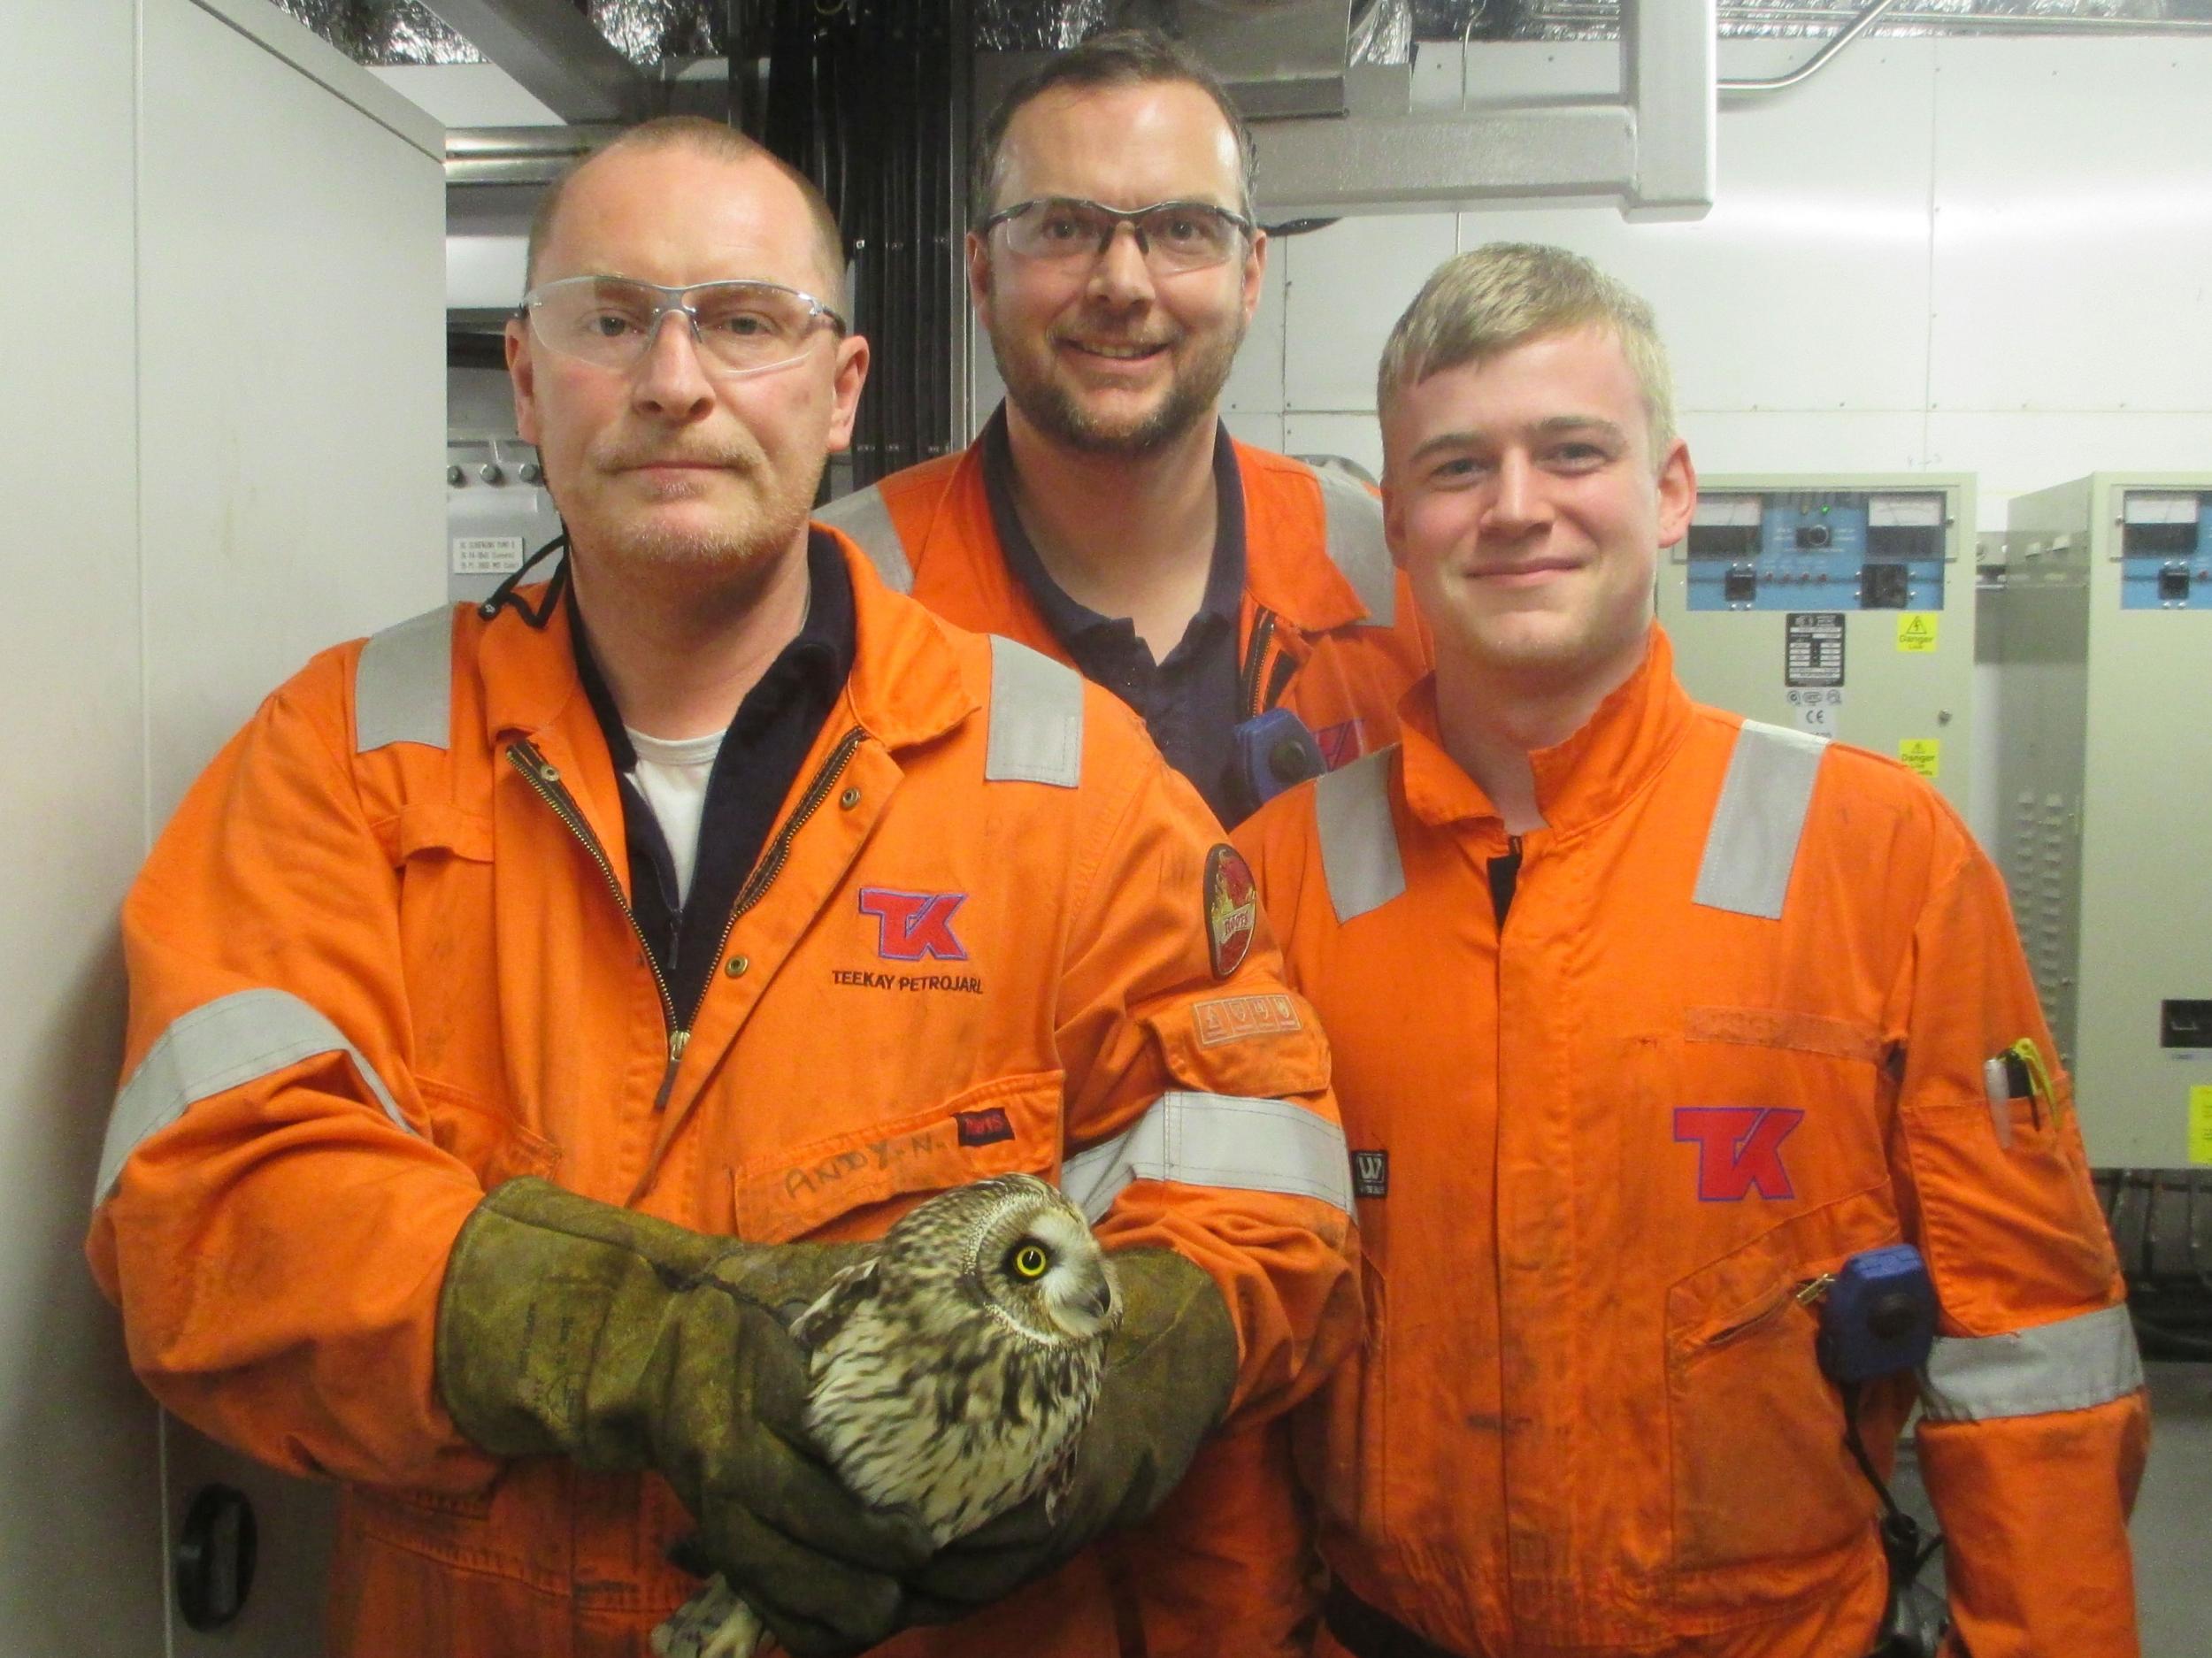 The proud rescuers on the oil rig with the owl